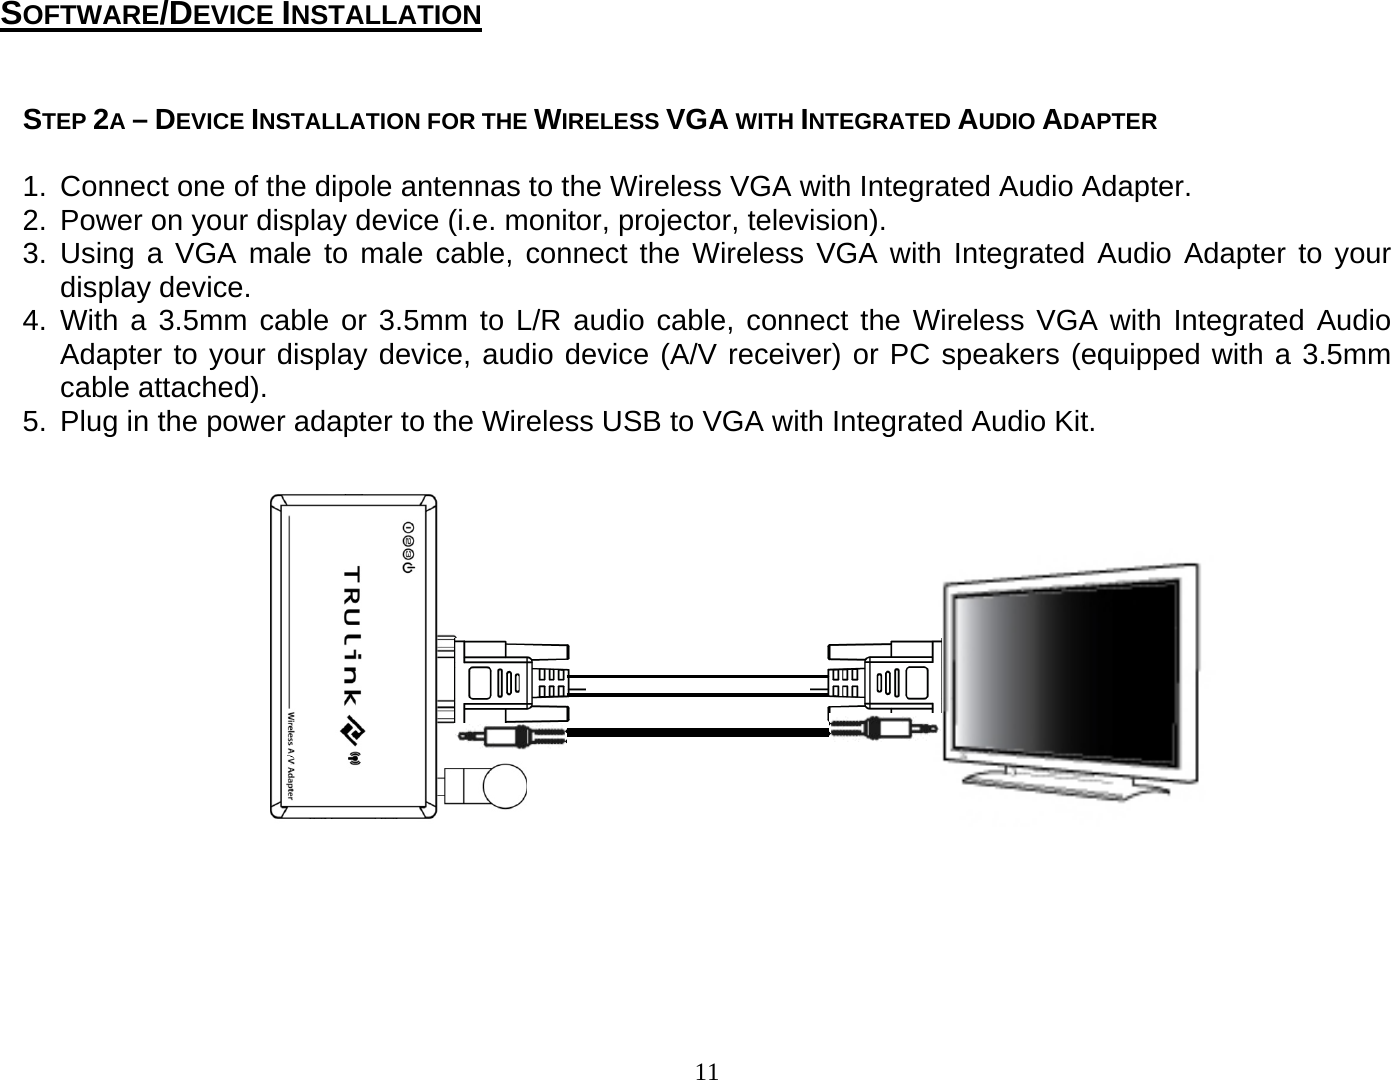 11  STEP 2A – DEVICE INSTALLATION FOR THE WIRELESS VGA WITH INTEGRATED AUDIO ADAPTER  1.  Connect one of the dipole antennas to the Wireless VGA with Integrated Audio Adapter. 2.  Power on your display device (i.e. monitor, projector, television).   3. Using a VGA male to male cable, connect the Wireless VGA with Integrated Audio Adapter to your display device. 4. With a 3.5mm cable or 3.5mm to L/R audio cable, connect the Wireless VGA with Integrated Audio Adapter to your display device, audio device (A/V receiver) or PC speakers (equipped with a 3.5mm cable attached).   5.  Plug in the power adapter to the Wireless USB to VGA with Integrated Audio Kit.                     SOFTWARE/DEVICE INSTALLATION 